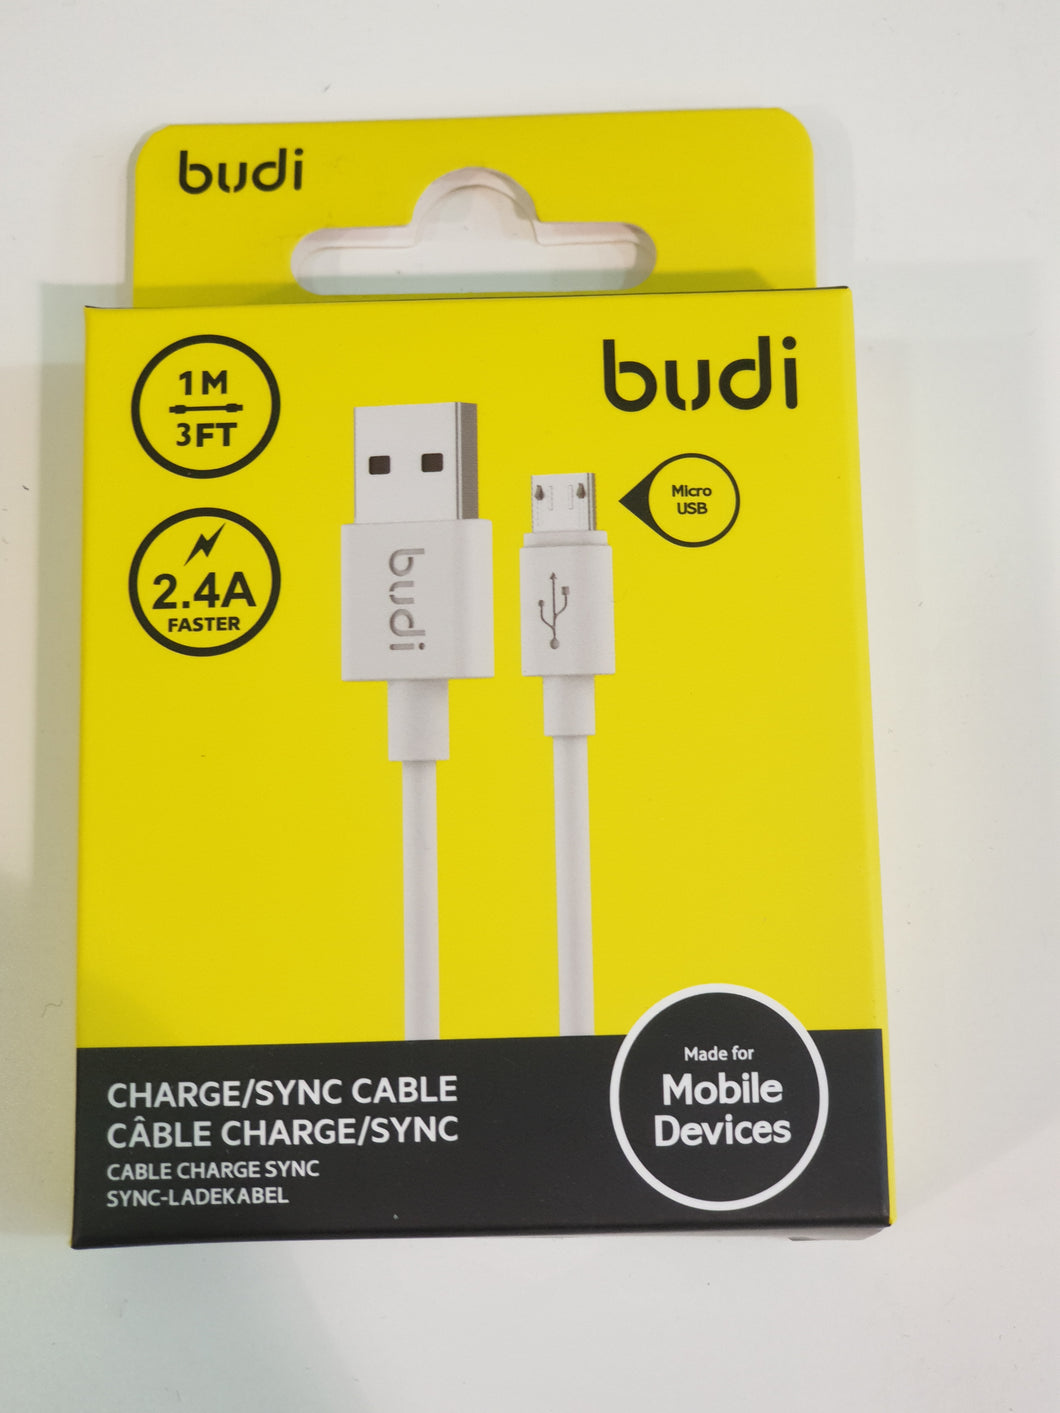 Budi Micro USB Cable 1M Fast Charge 2.4amp For Android Smartphones & Tablets